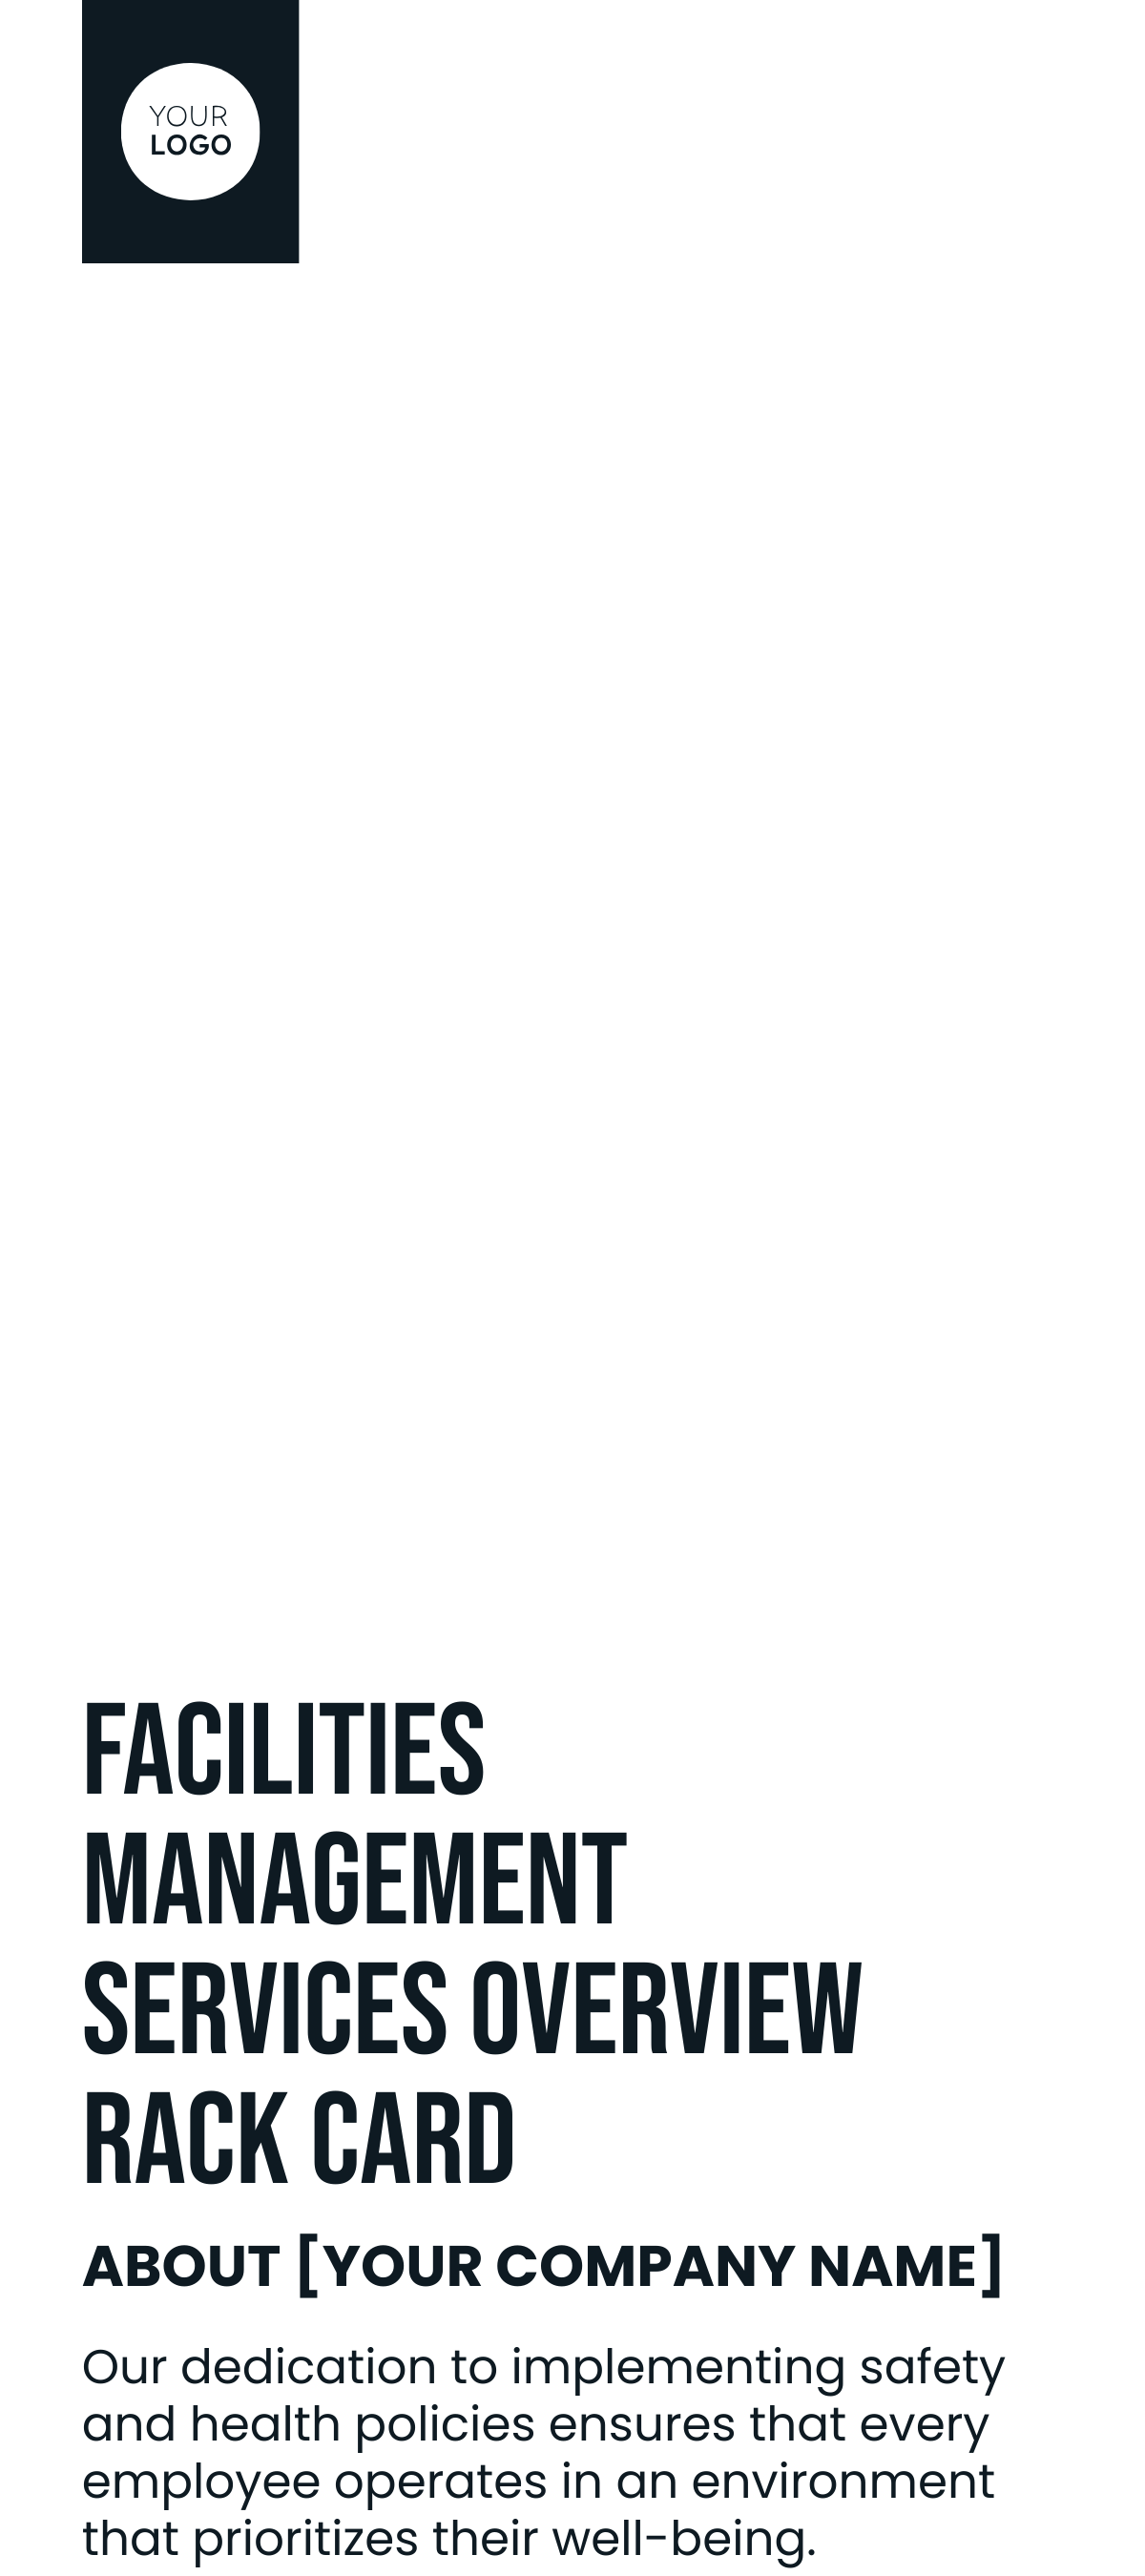 Facilities Management Services Overview Rack Card Template